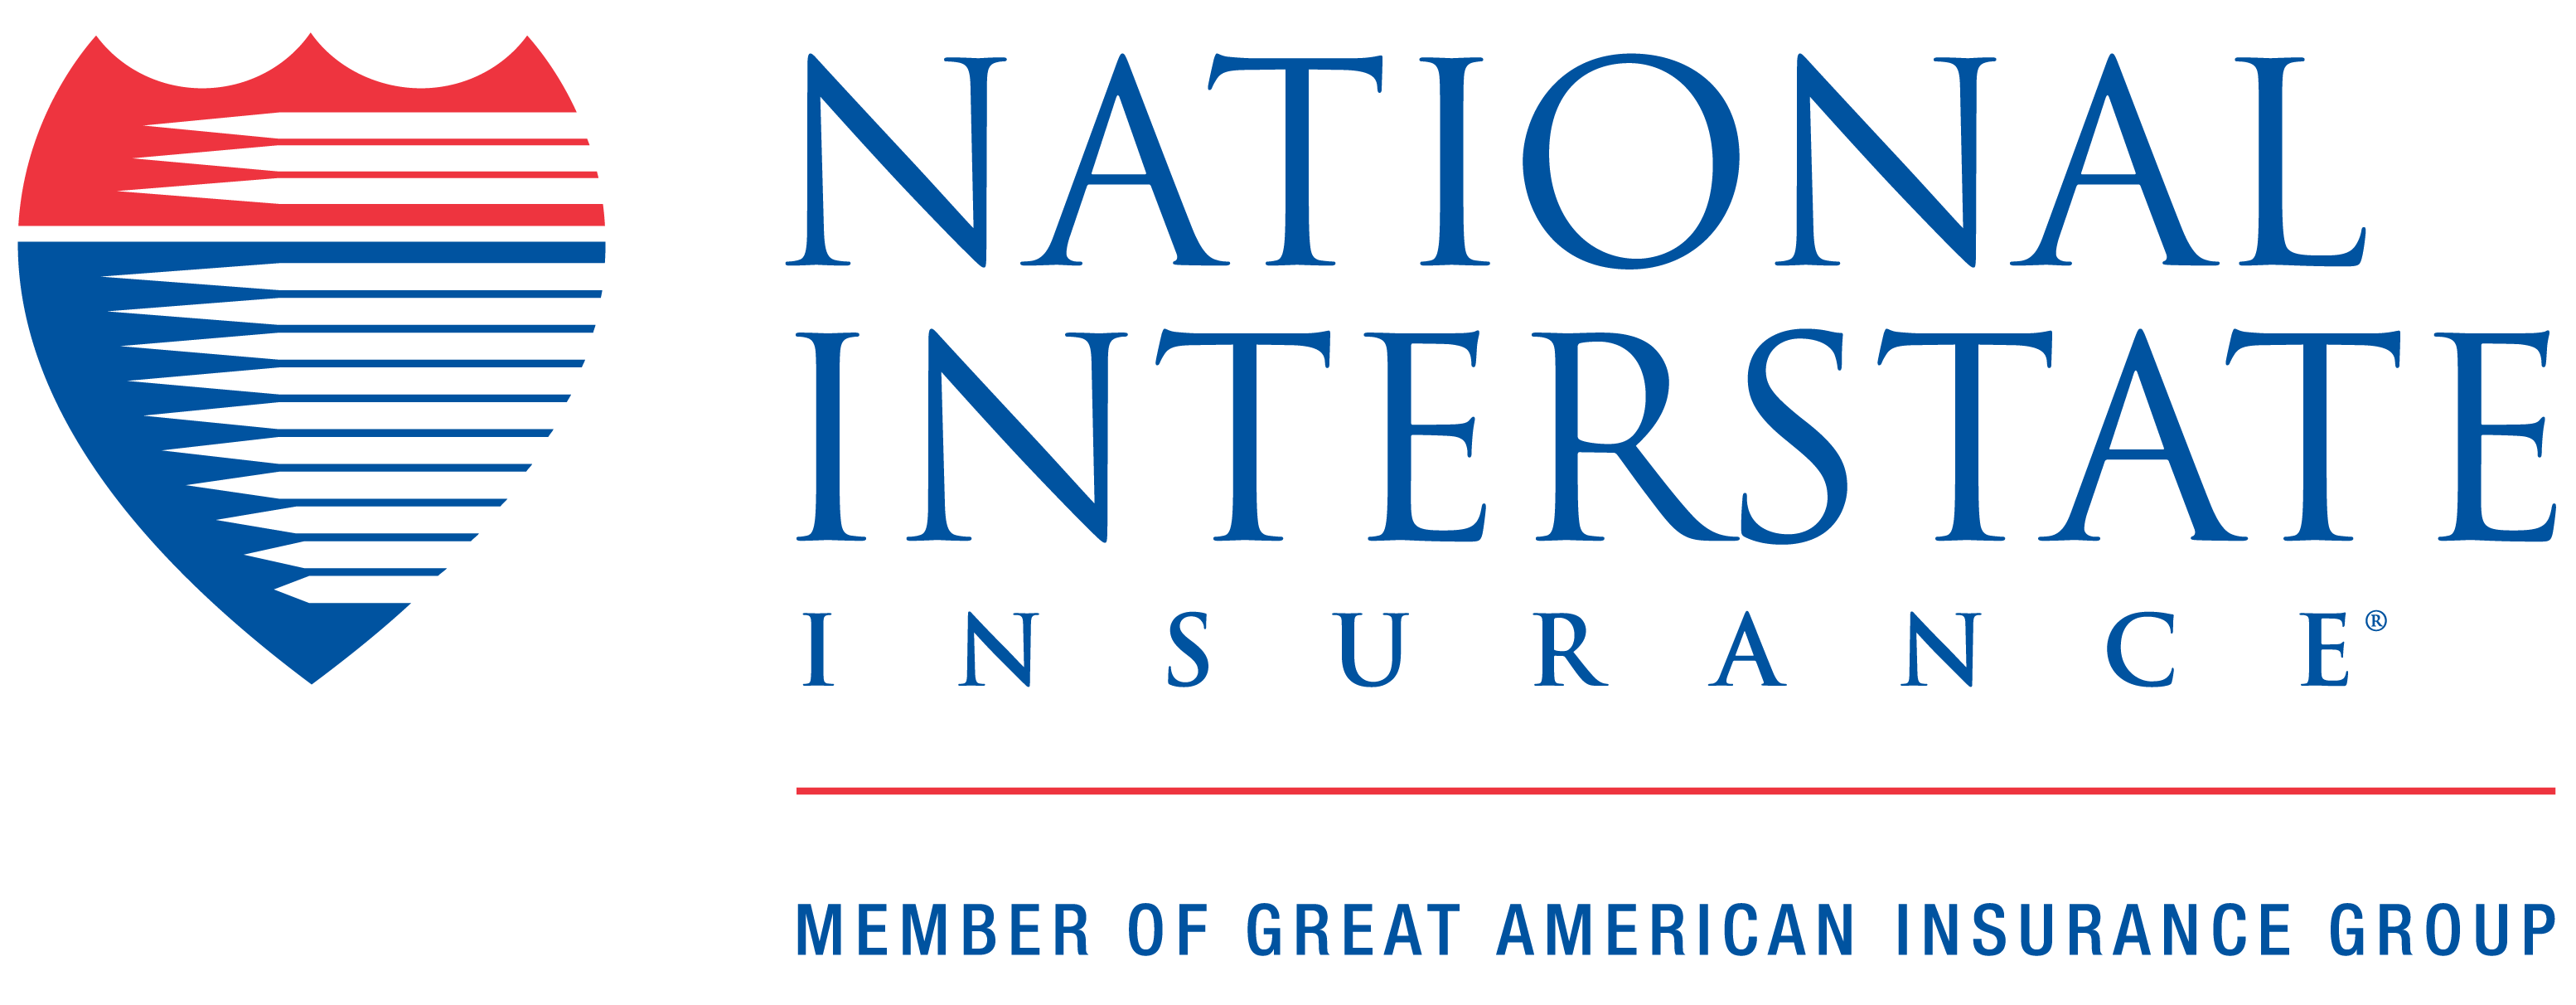 National Interstate Insurance Co